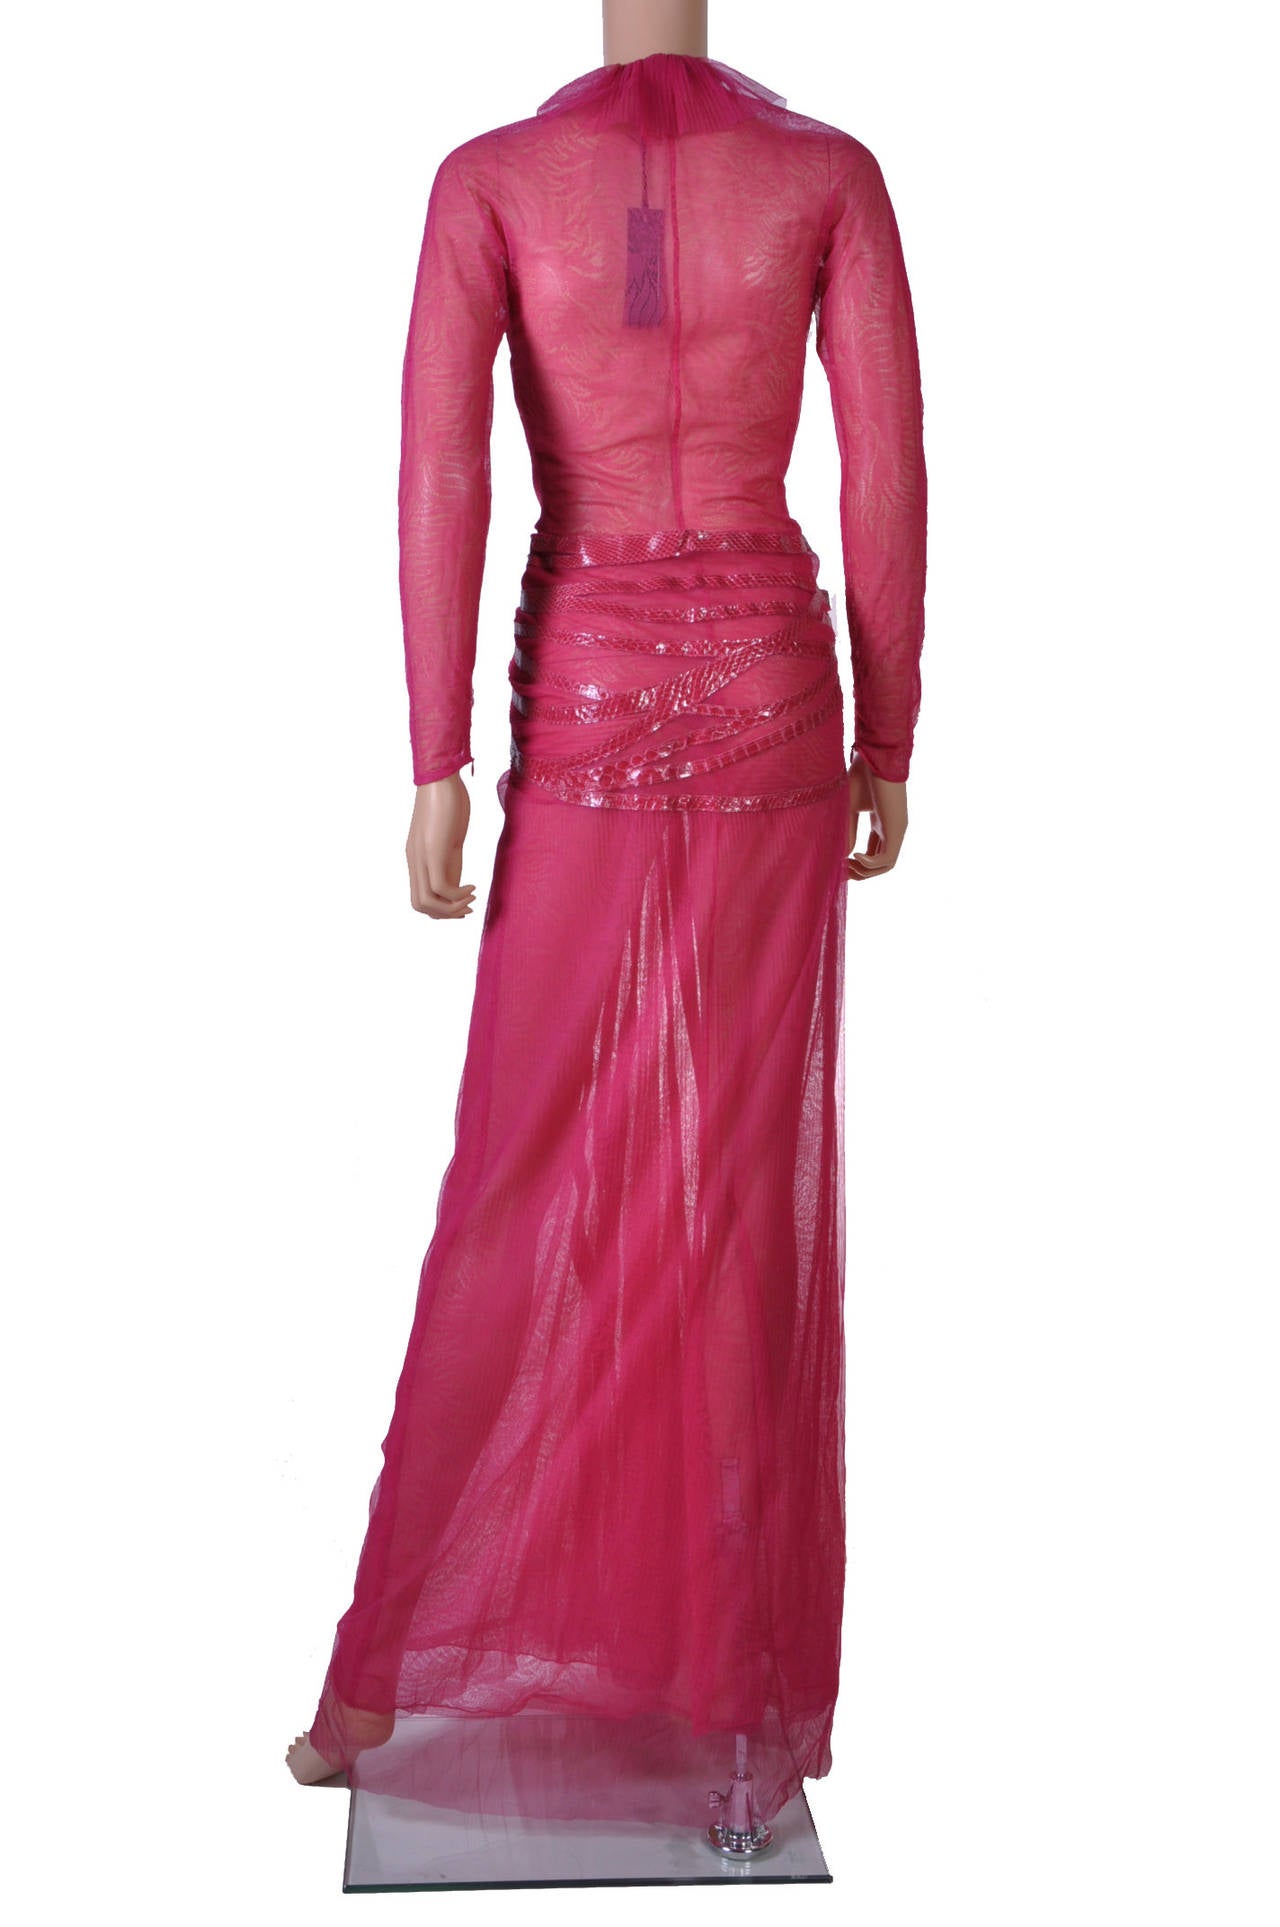 NEW and HIGHLY COLLECTIBLE VERSACE PINK LACE AND SNAKESKIN GOWN 3